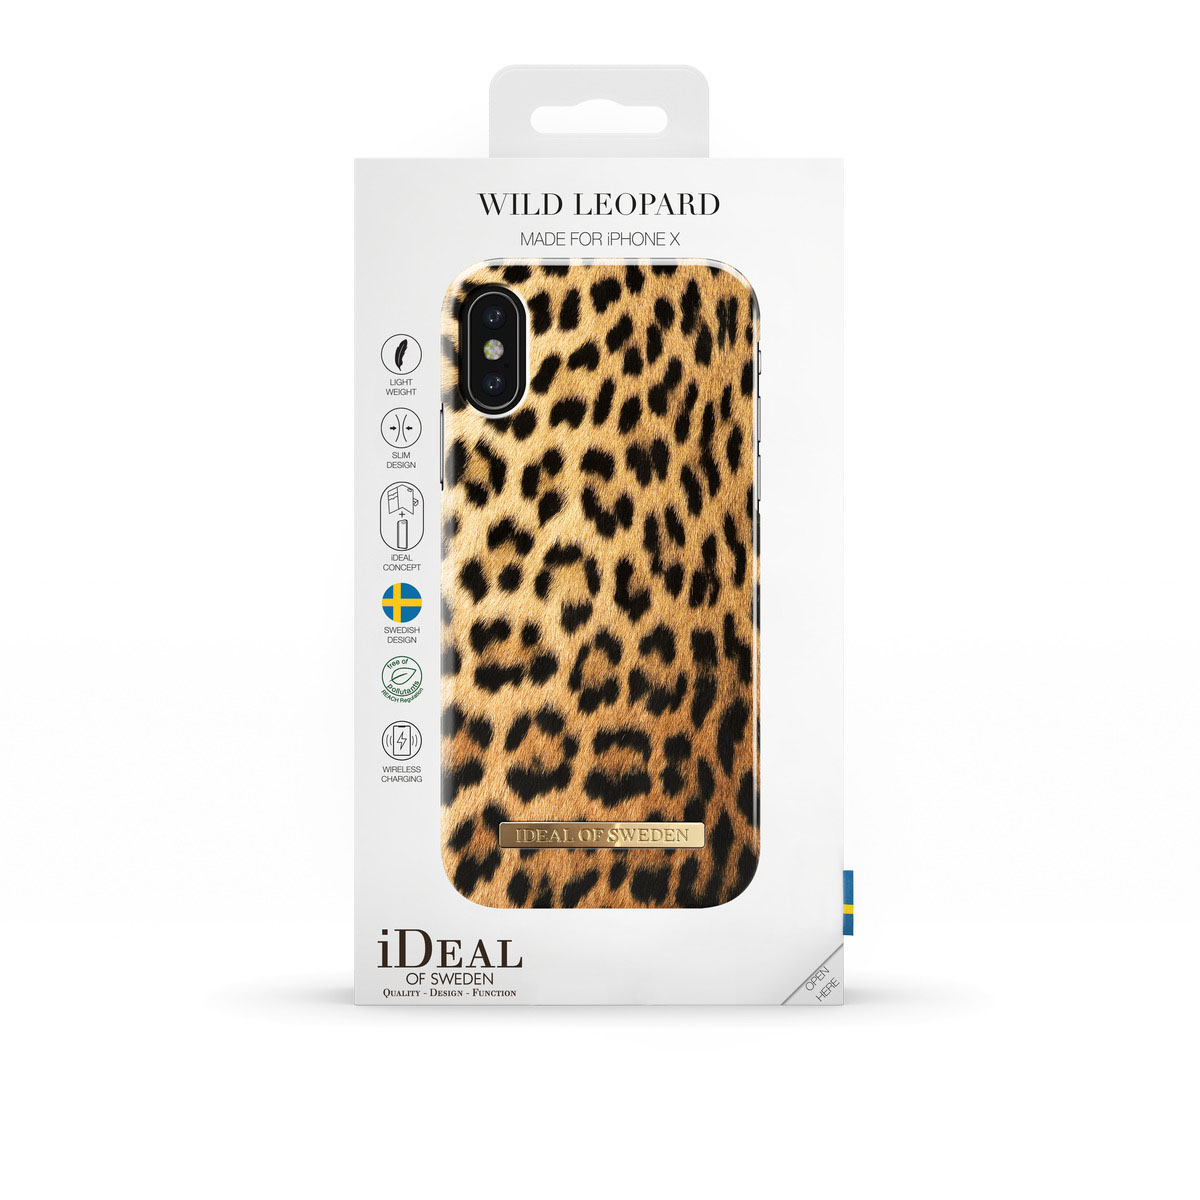 SWEDEN Leopard iPhone OF Apple, X, IDEAL Backcover, Fashion, Wild